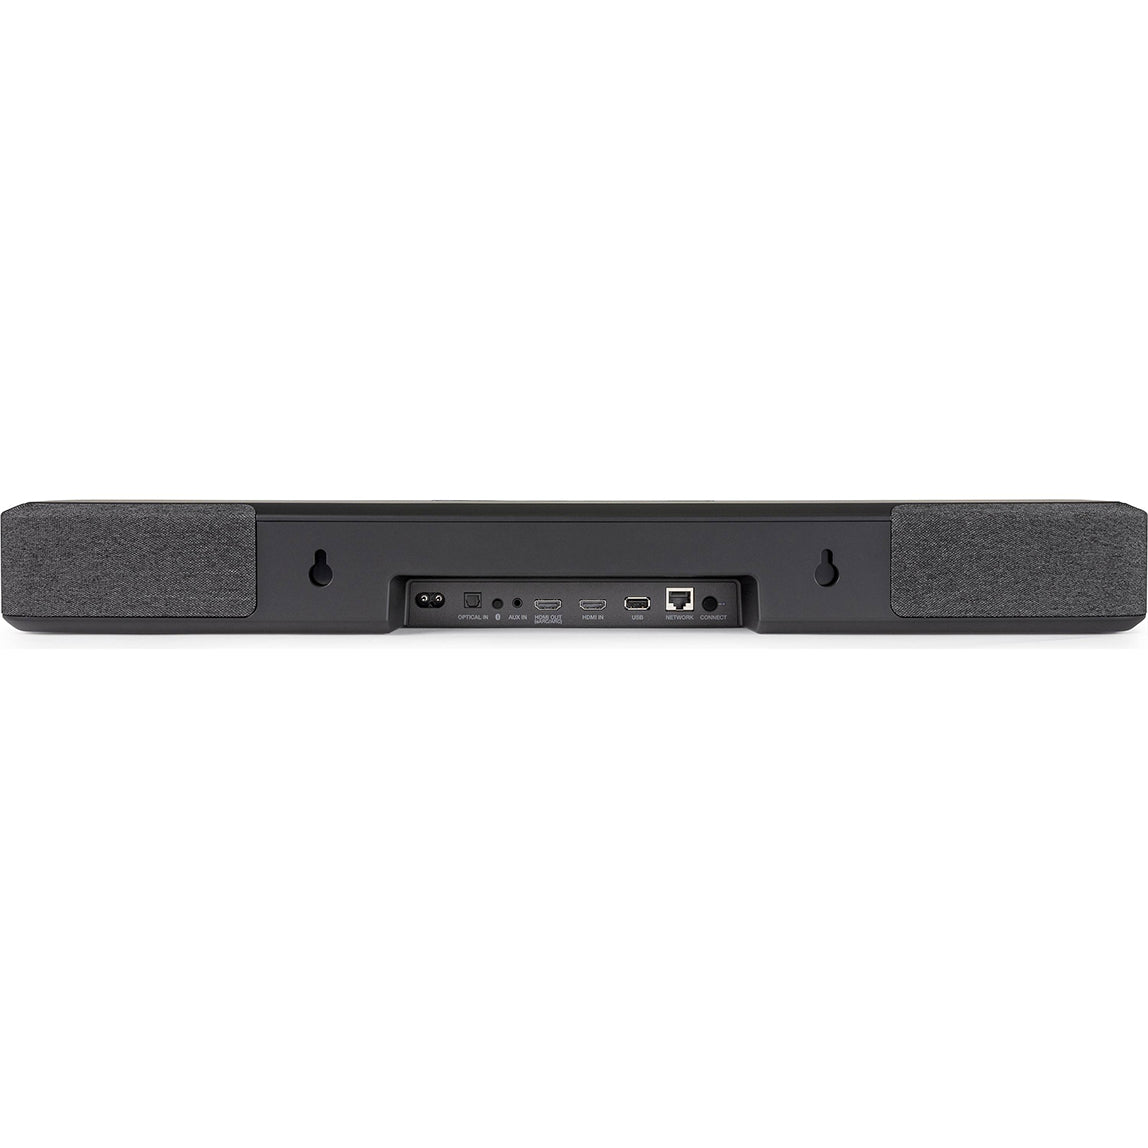 Denon Home Sound Bar 550 - 4 channel sound bar with Dolby Atmos and HEOS